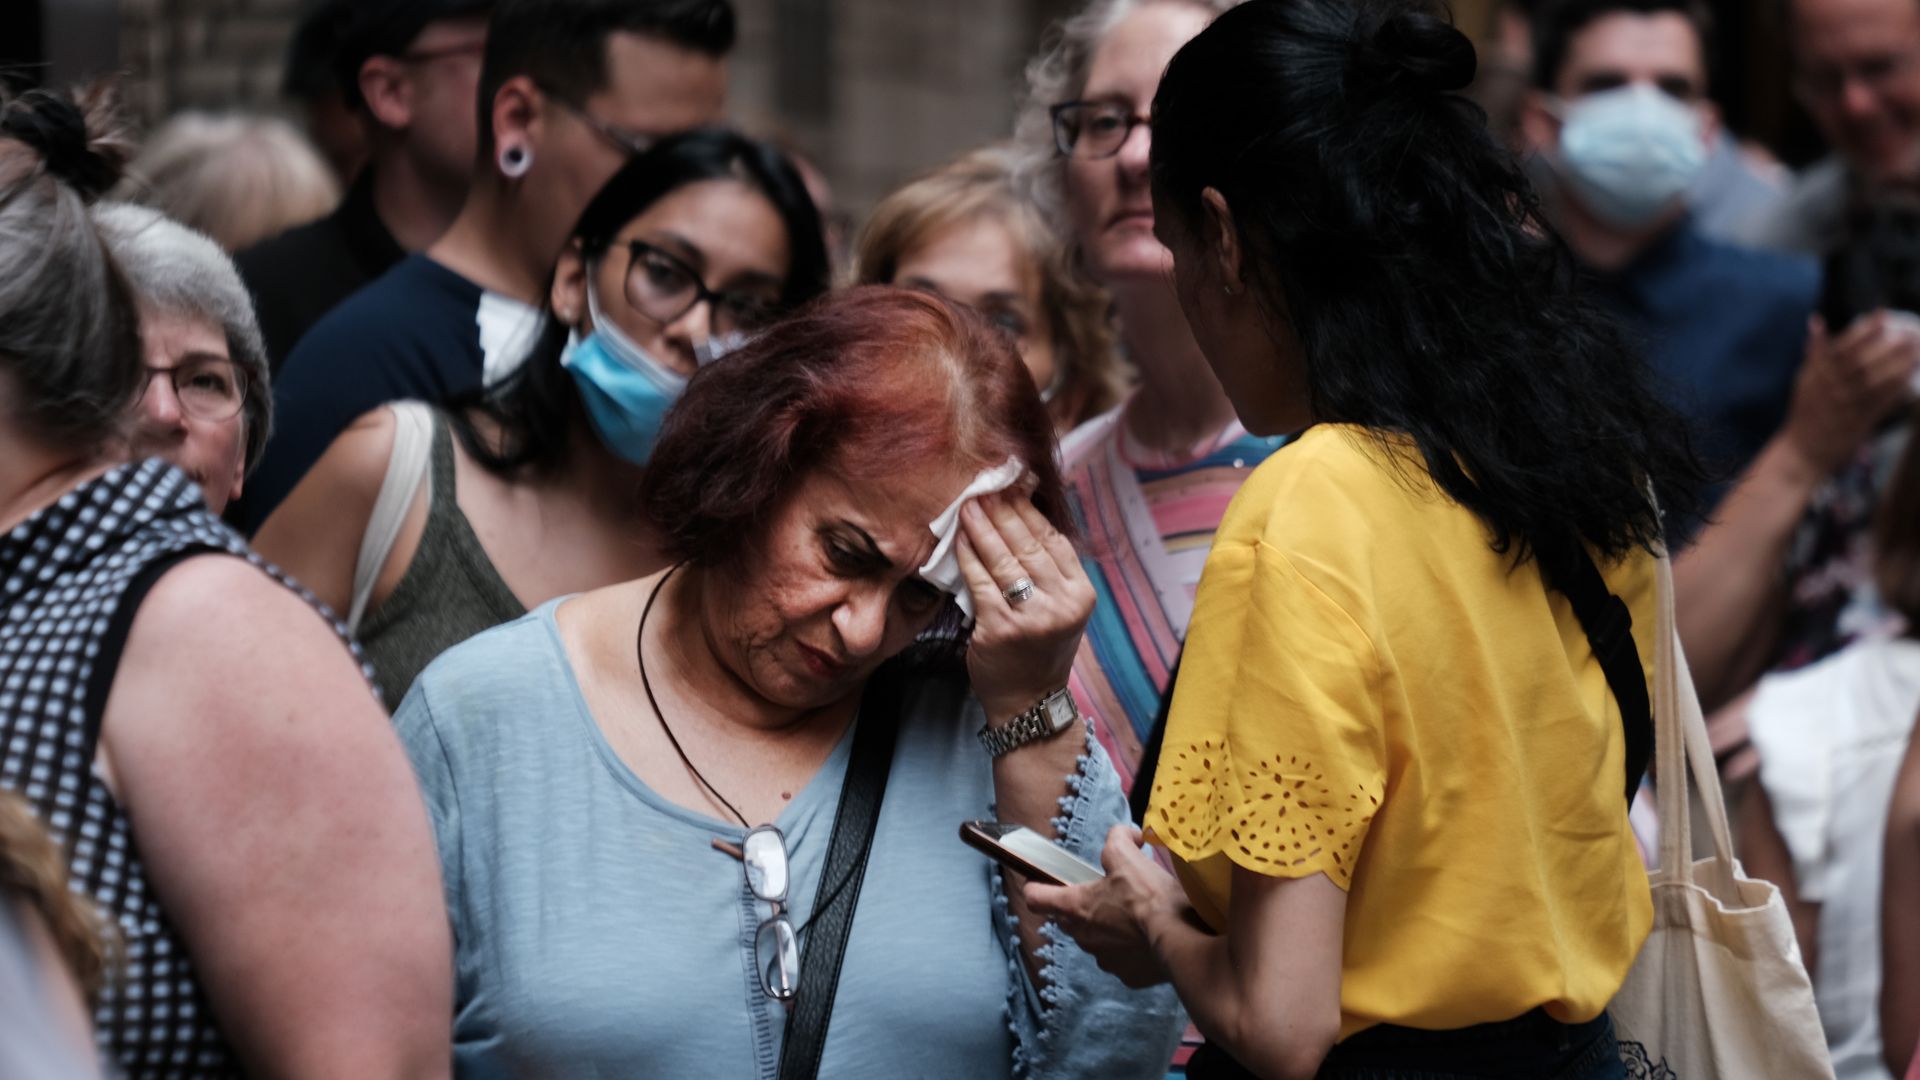 A woman wiping her brow in New York City on July 21.